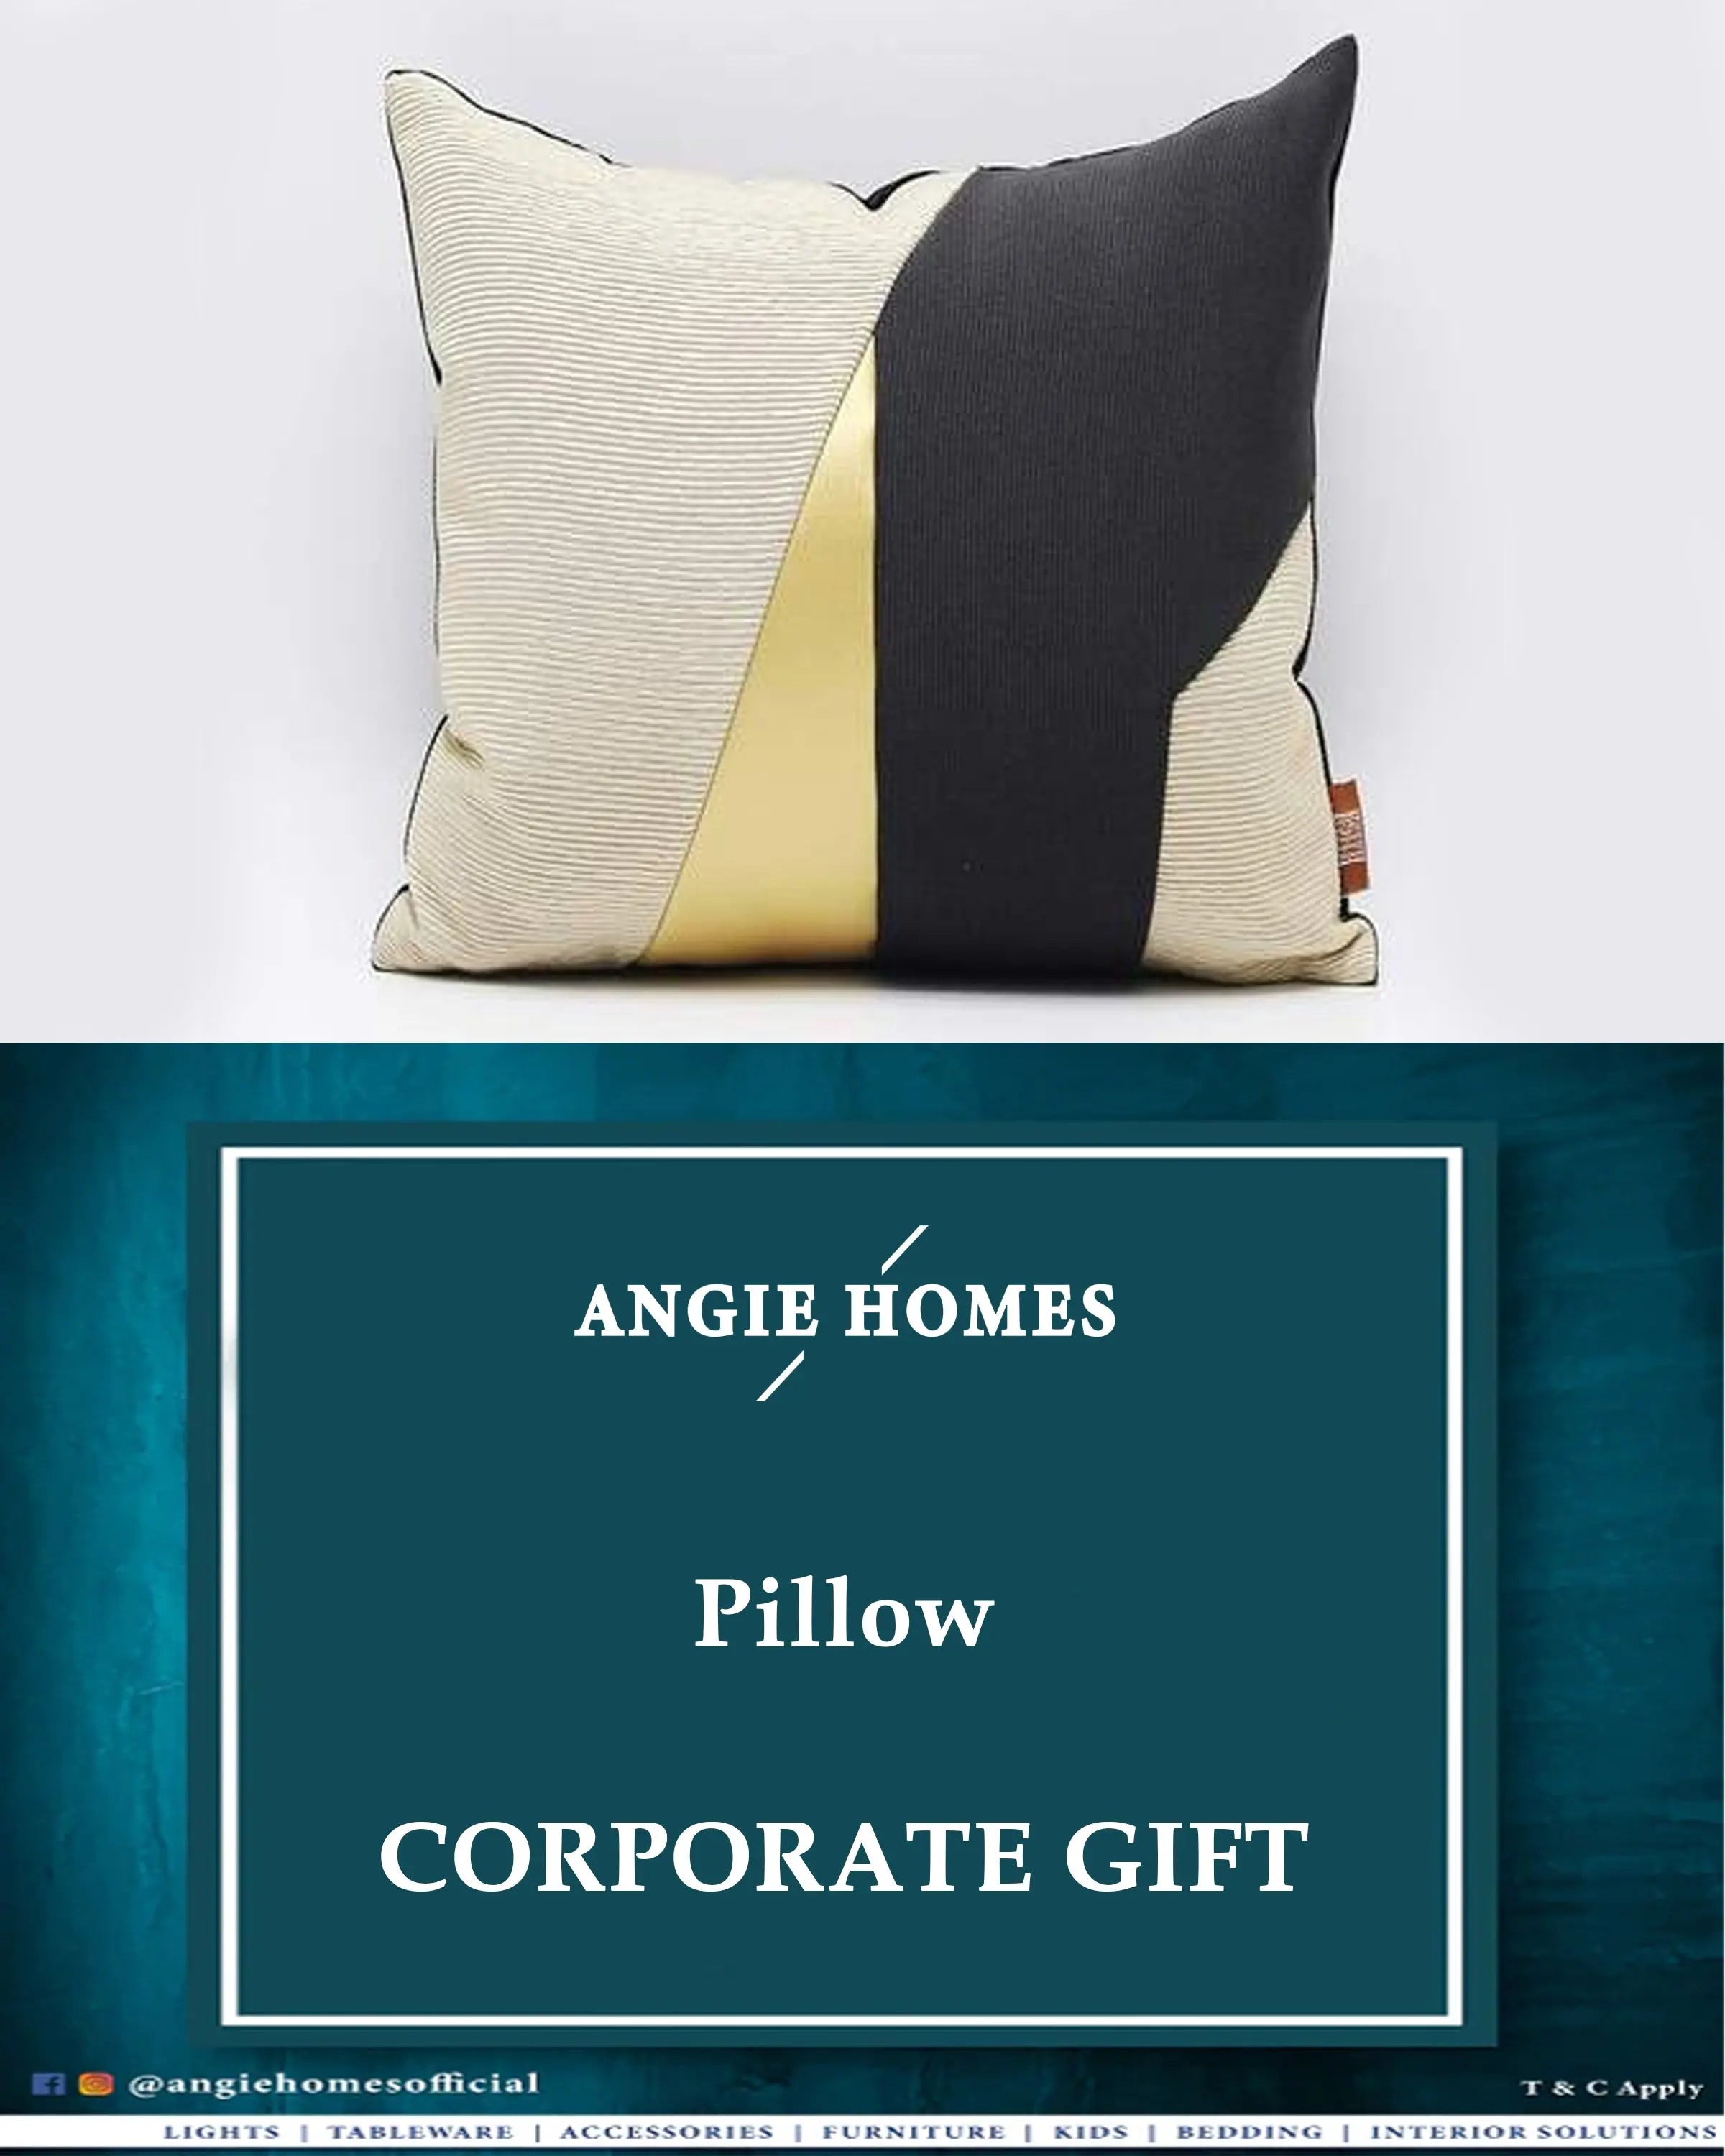 Pillow Cushion for Wedding, House Warming & Corporate Gift ANGIE HOMES